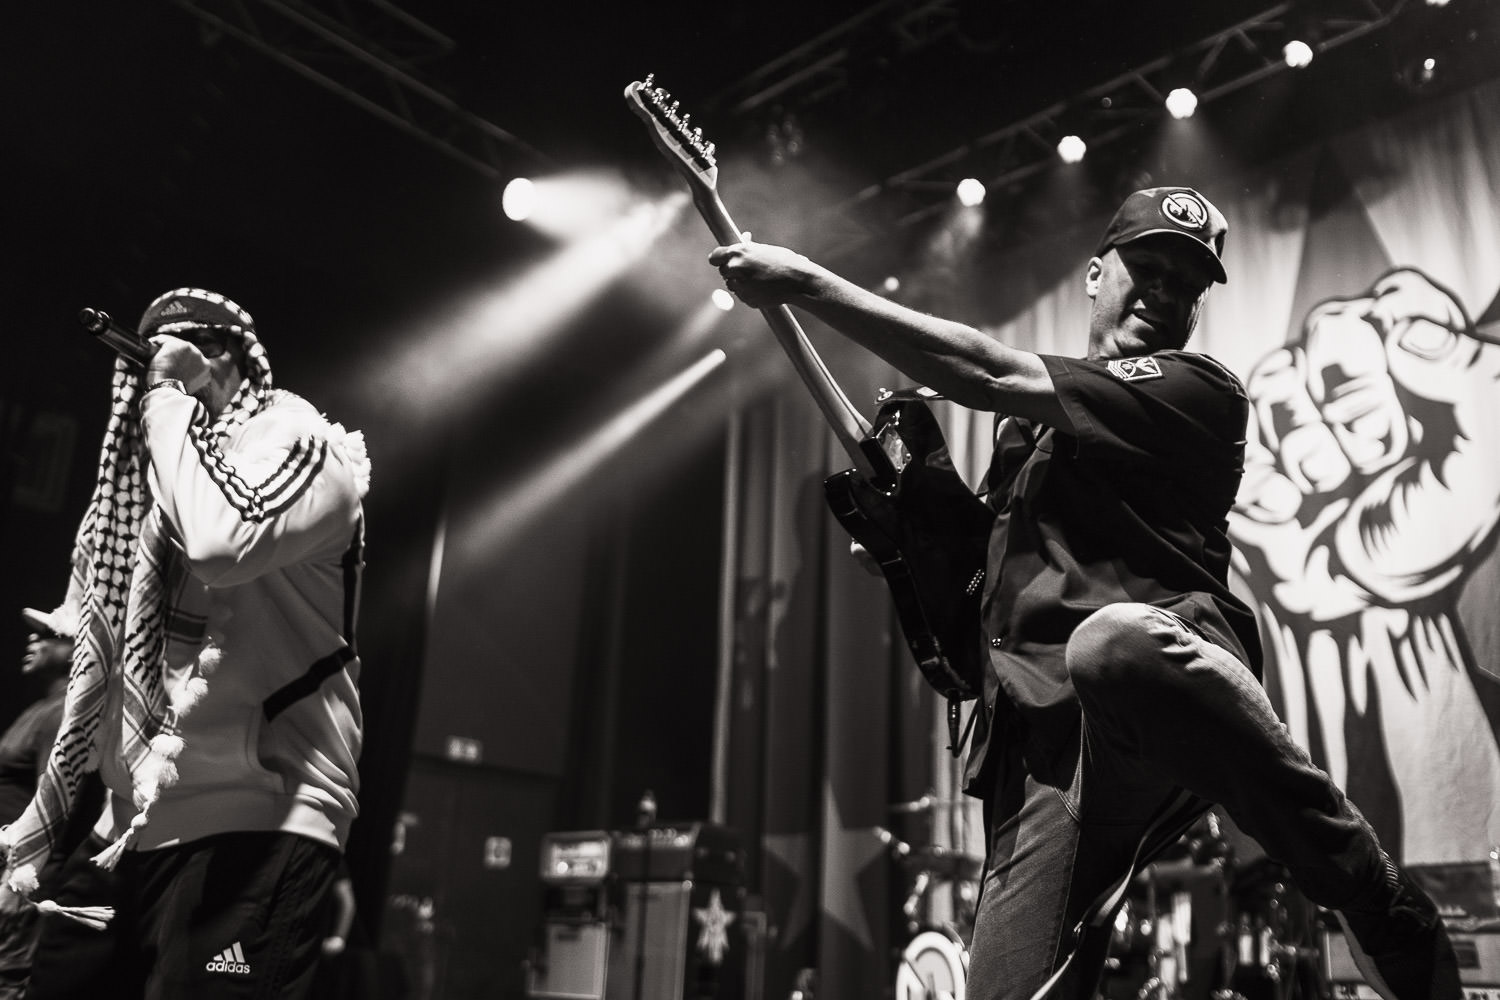 Tom Morello and B-Real in London 2019 on stage